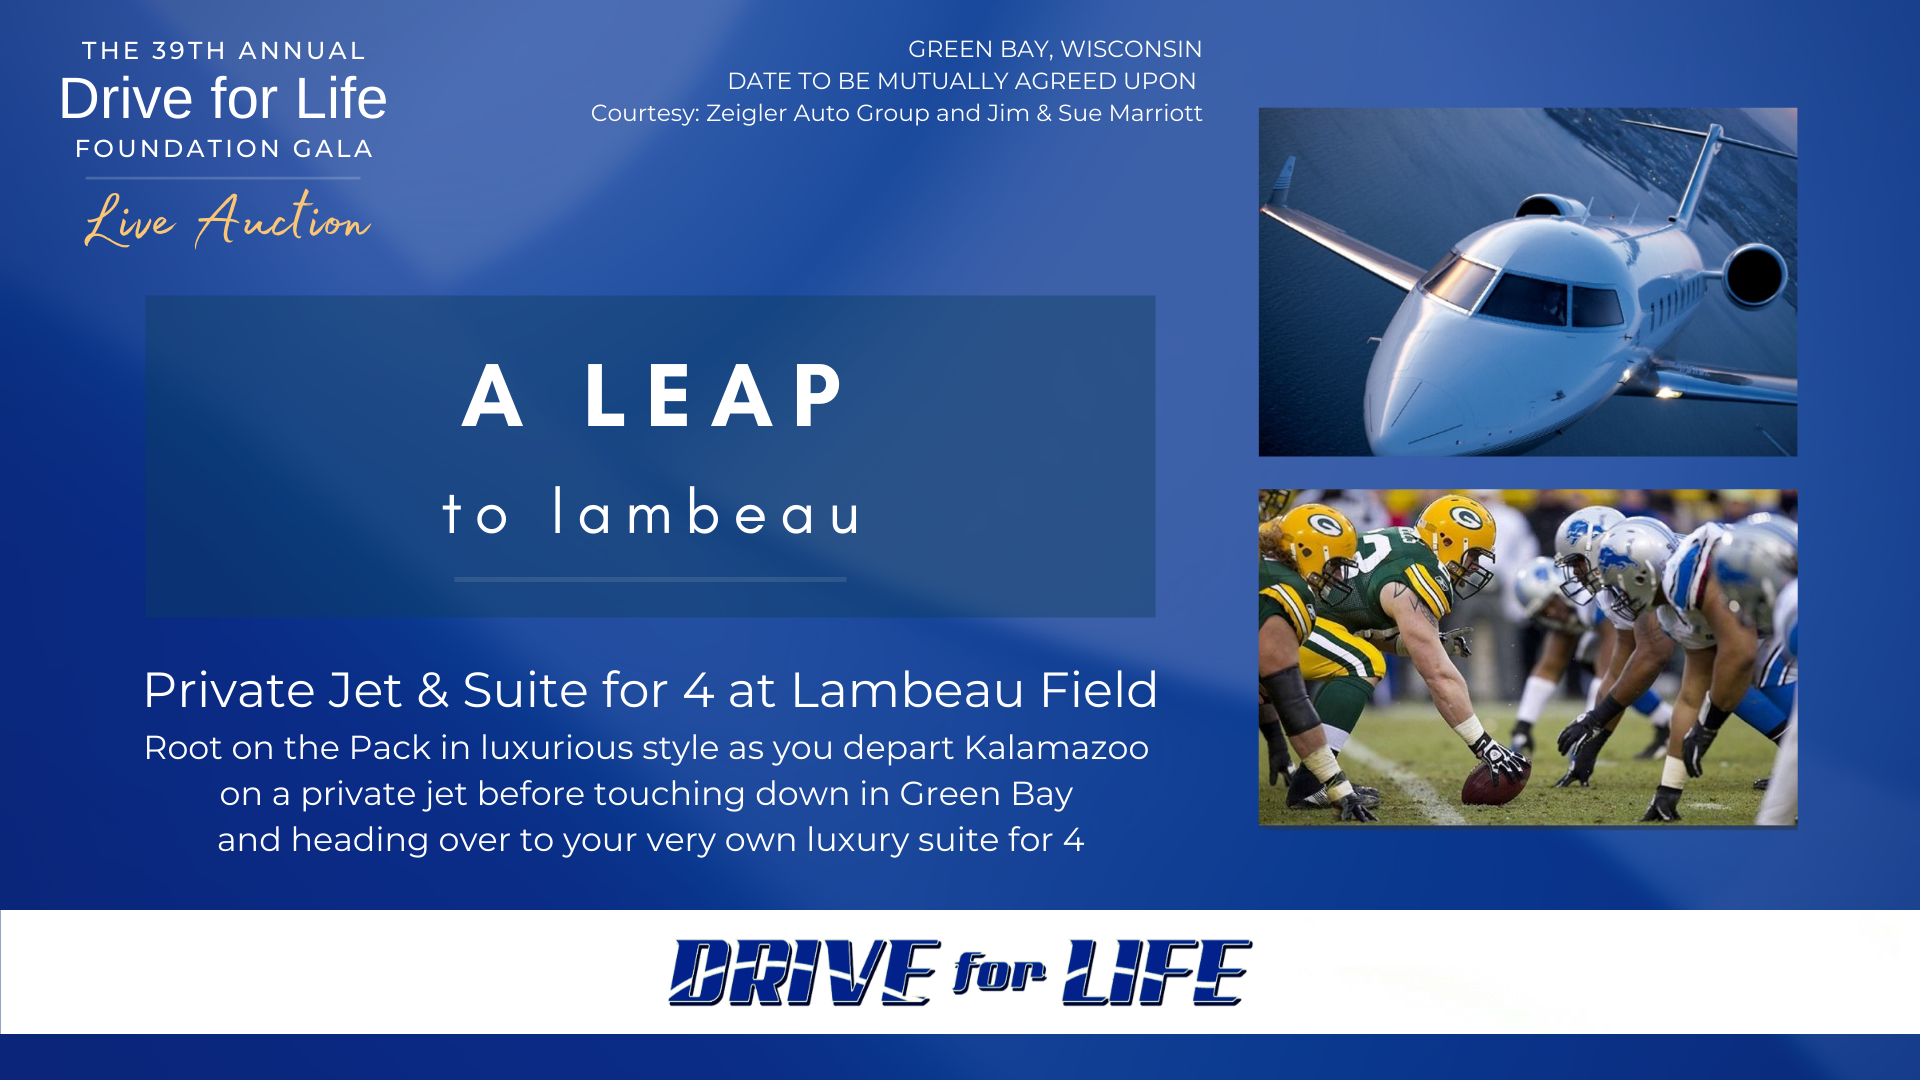 LIVE AUCTION EXPERIENCE: A Leap to Lambeau - Available at the 39th Annual Drive for Life Foundation Monday, September 13, 2021 at 6:30 p.m. at the Radisson Plaza Hotel in Kalamazoo, Mich.